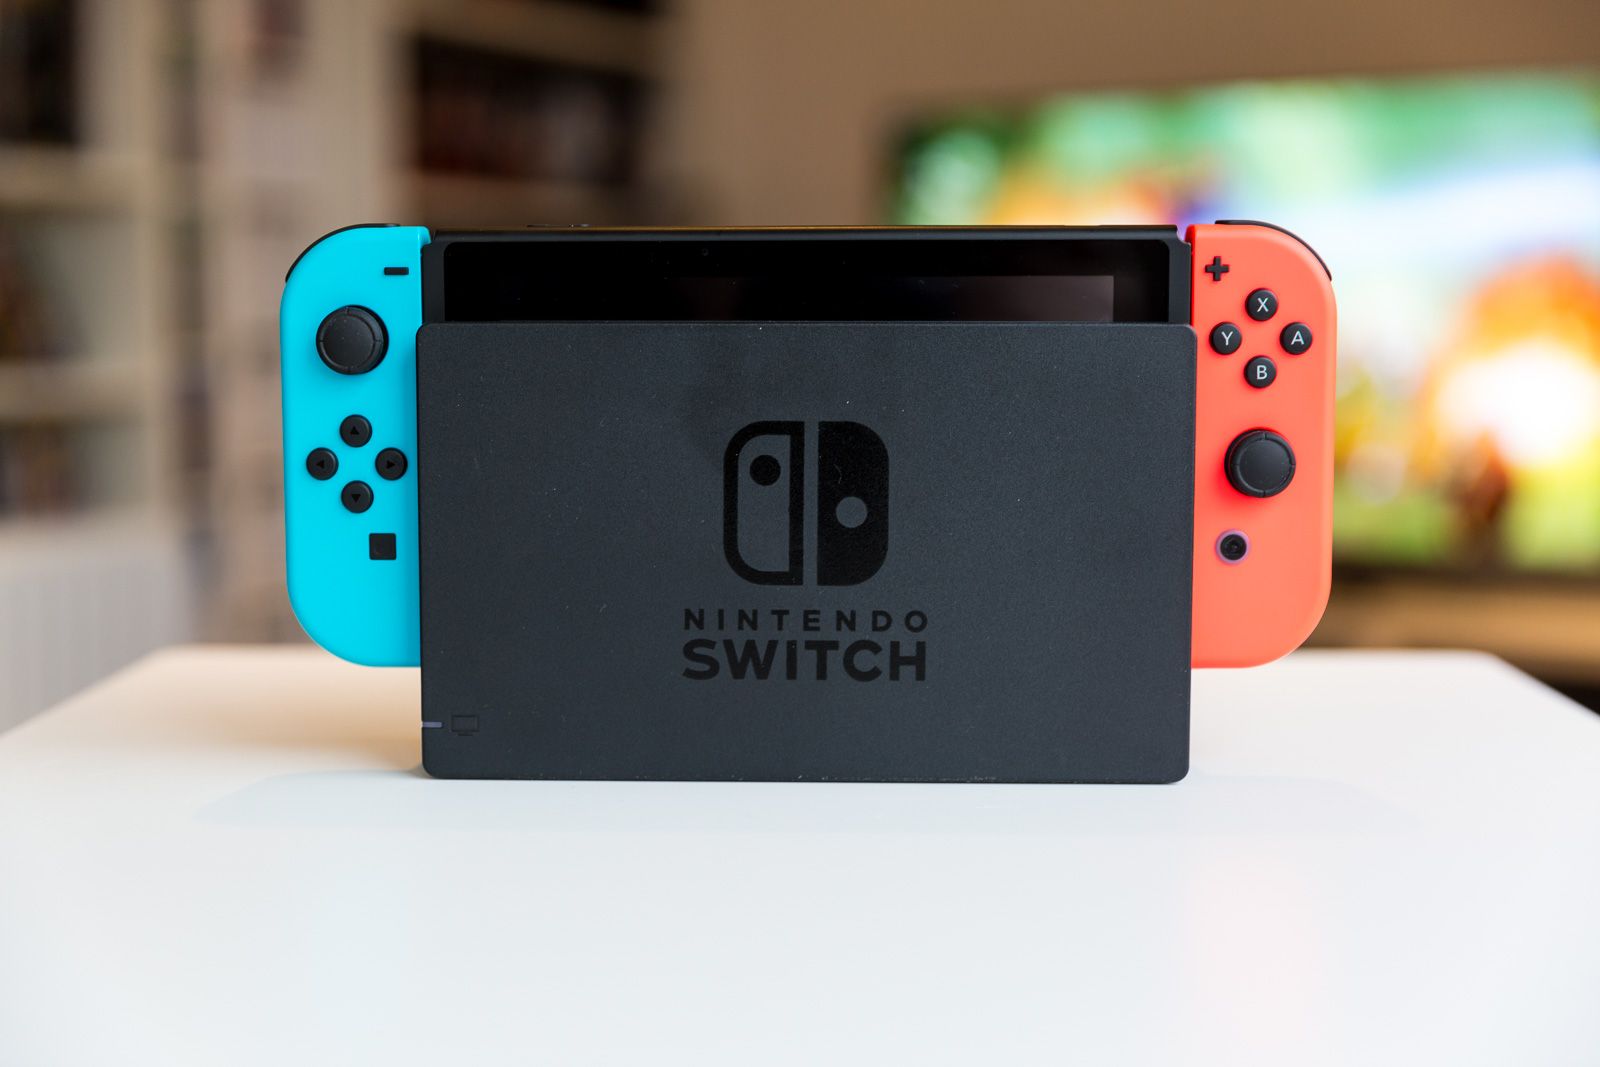 Nintendo Switch OLED model vs Nintendo Switch: What's the difference? photo 4